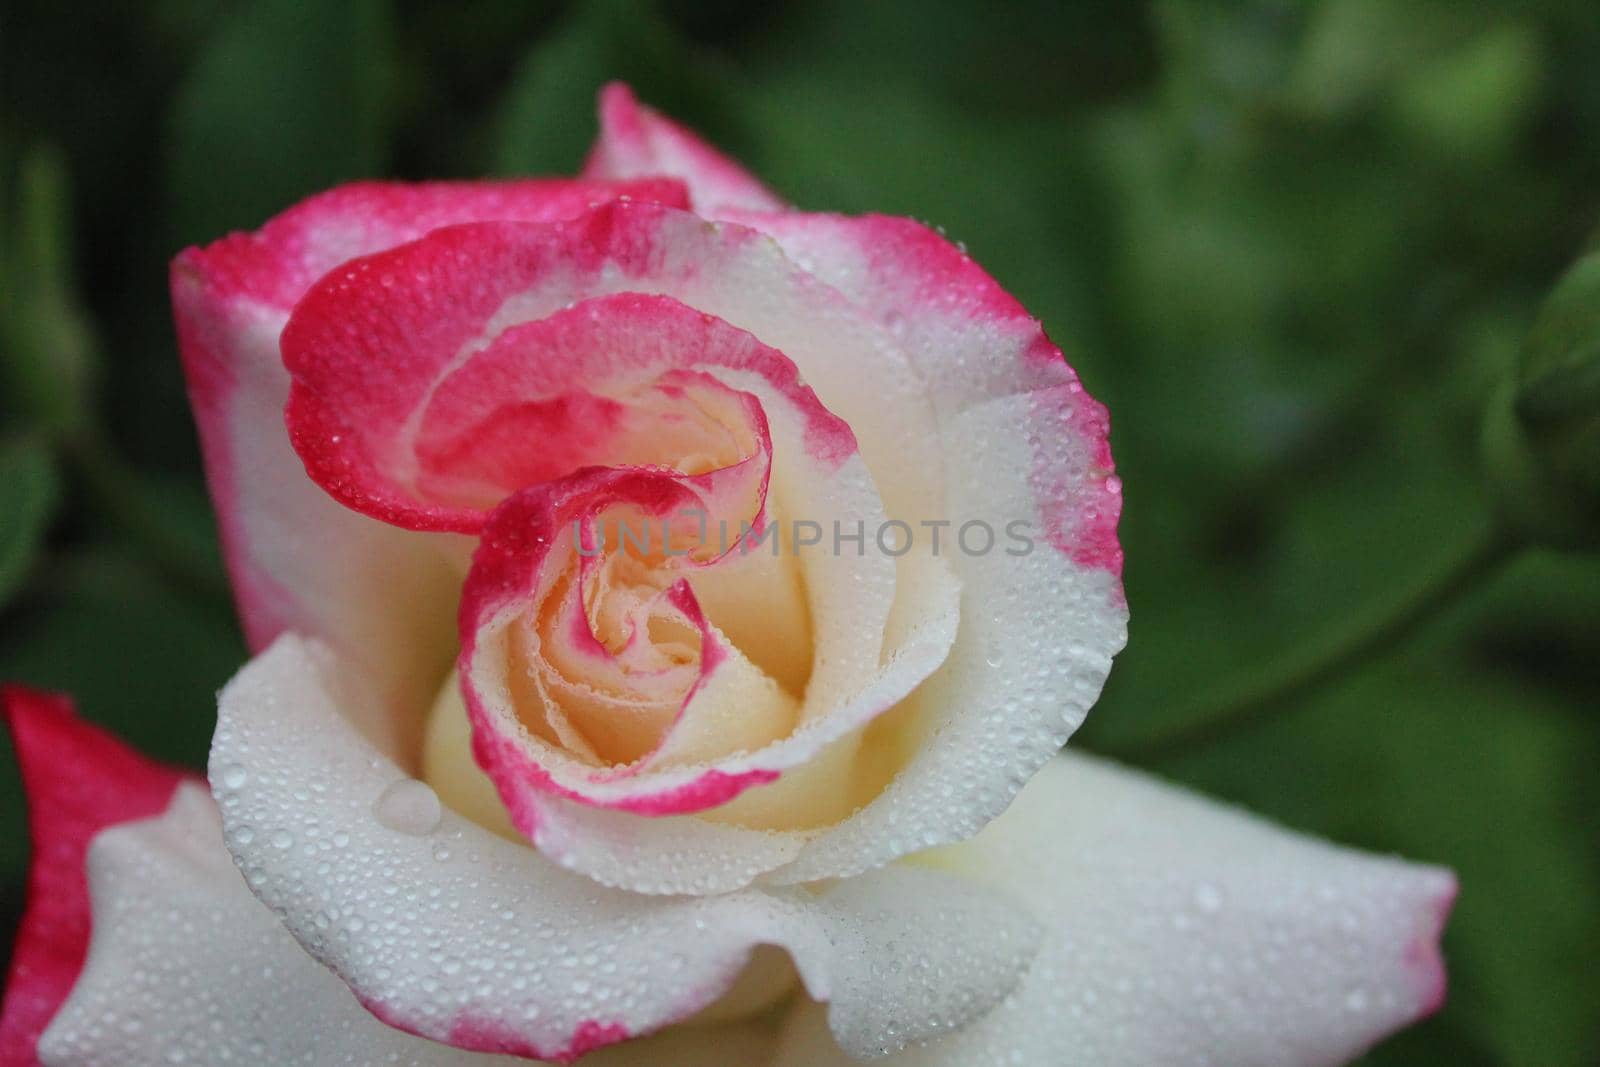 white pink two-set rose close-up. Growing rose flowers. horticulture. hobby.